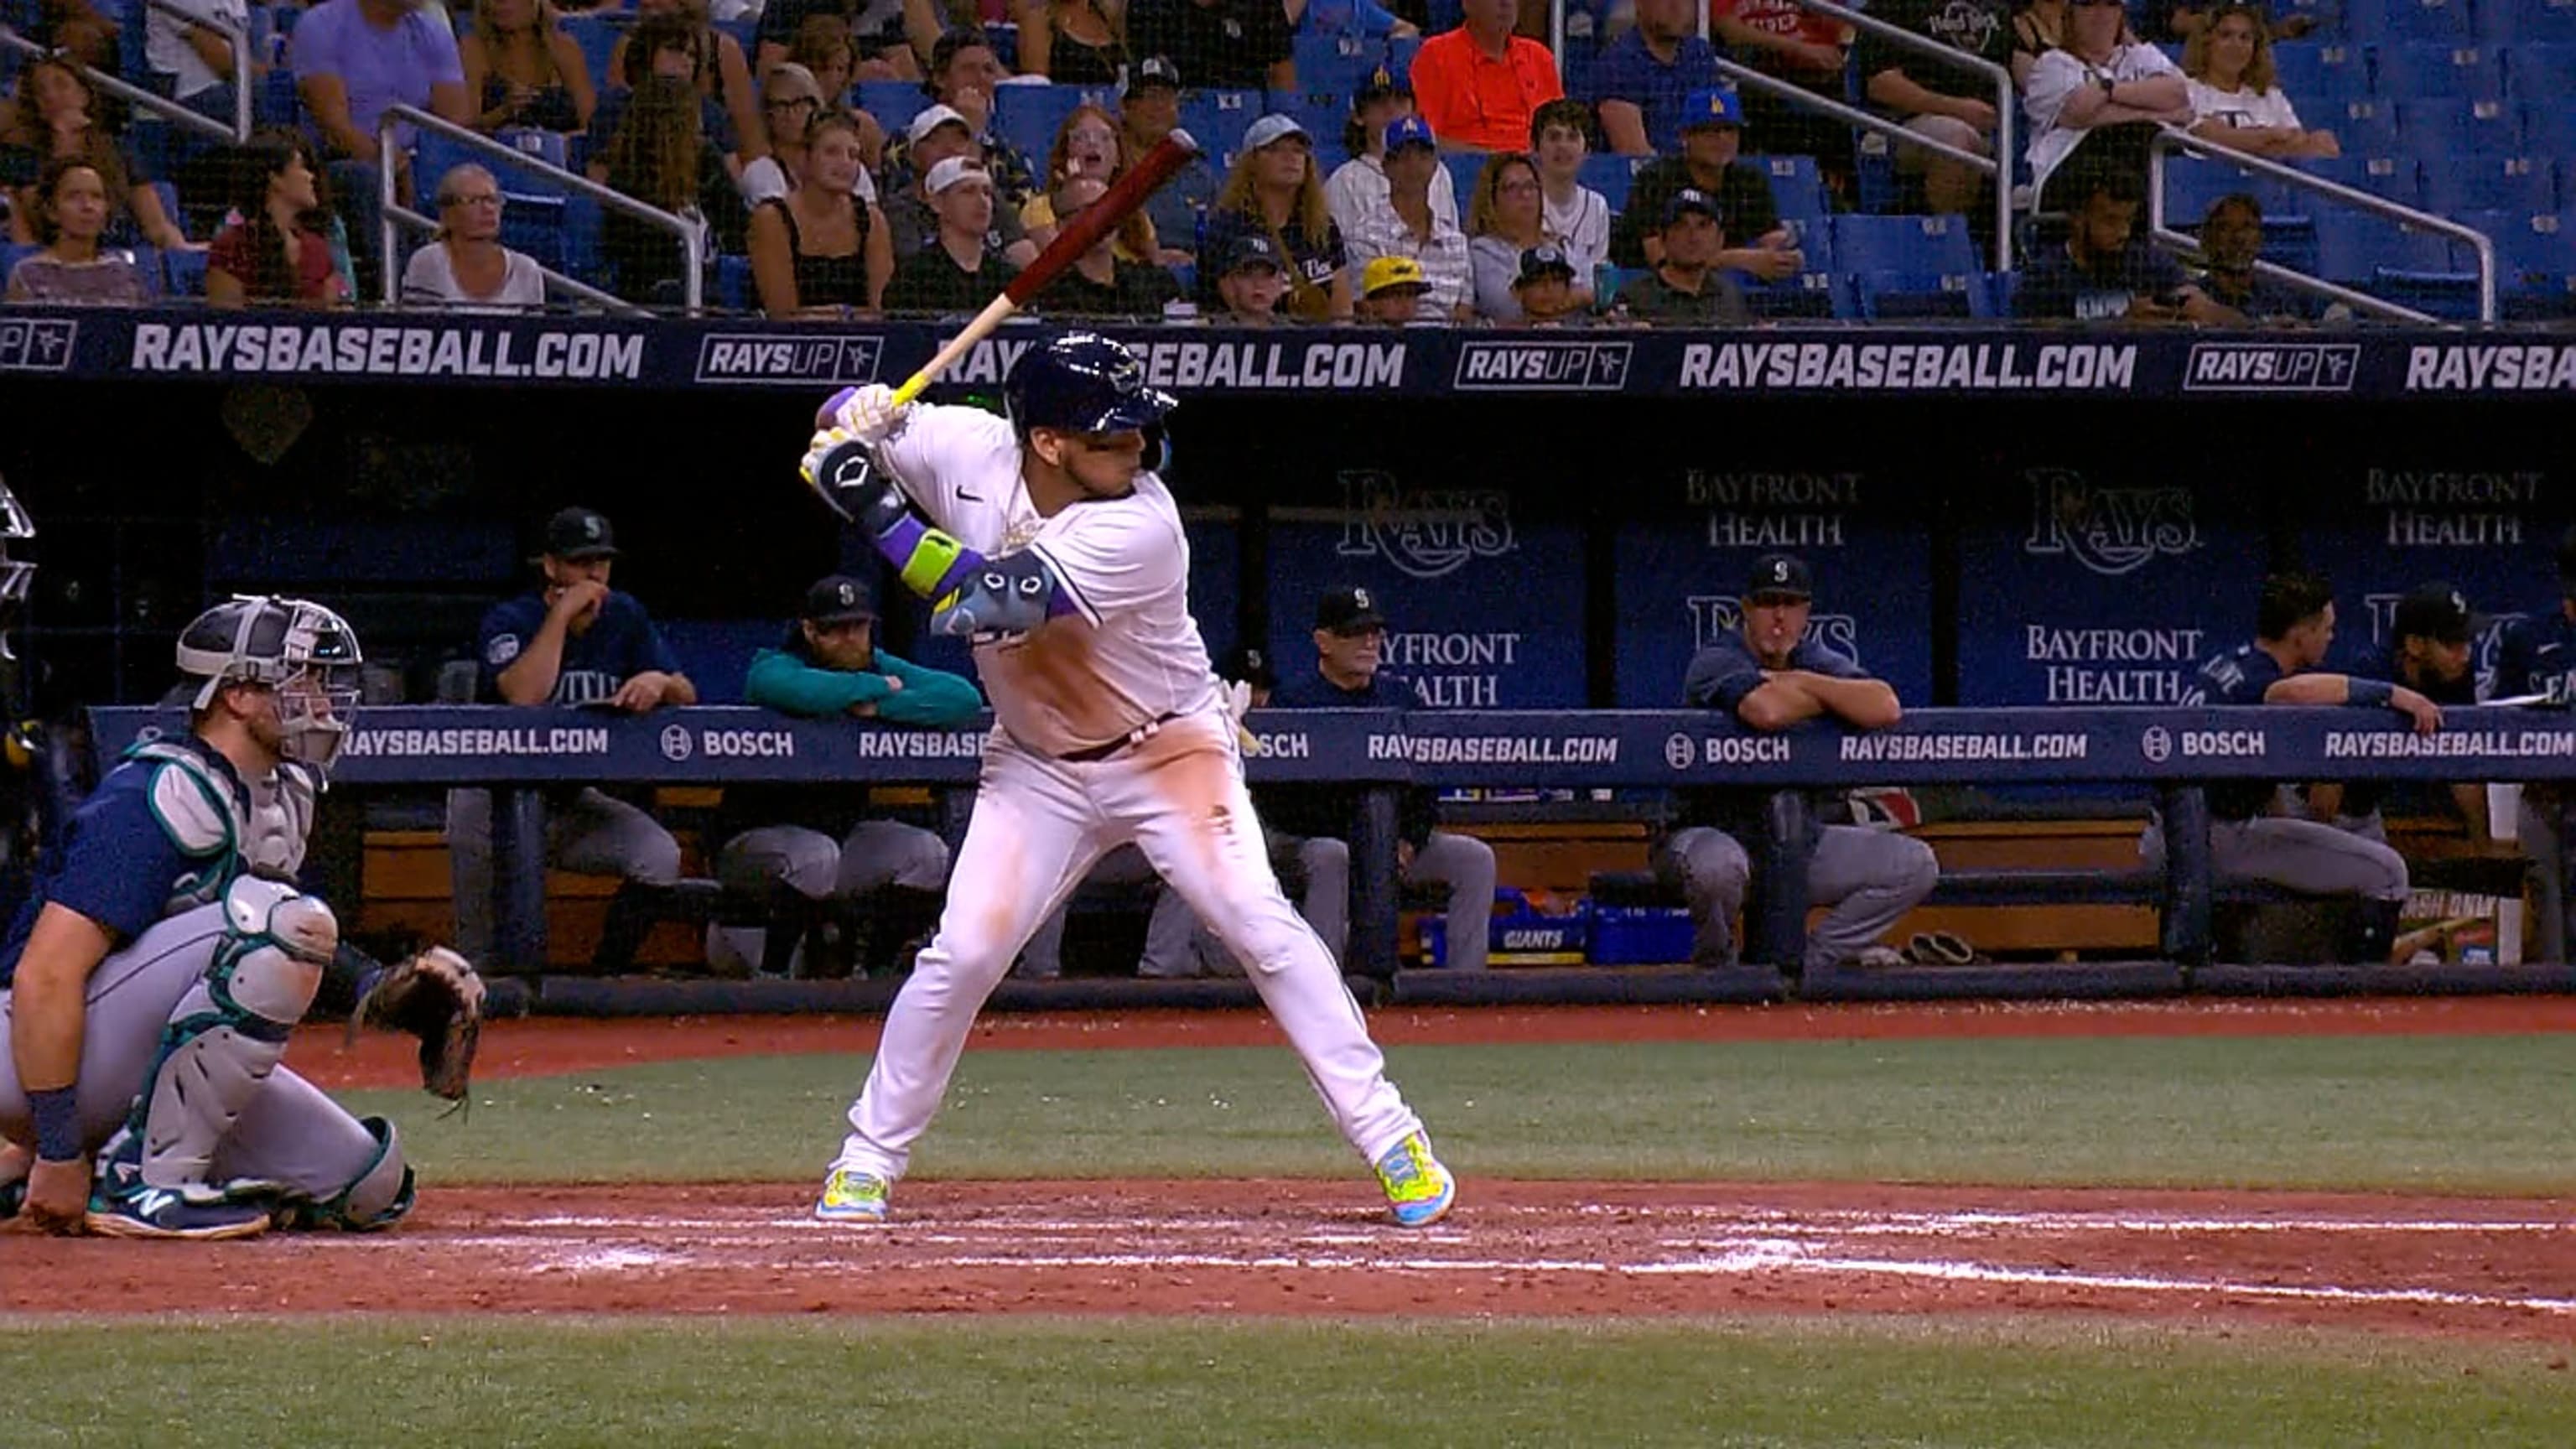 Pinto and Ramírez hit two-run homers in the 7th as the Rays rally